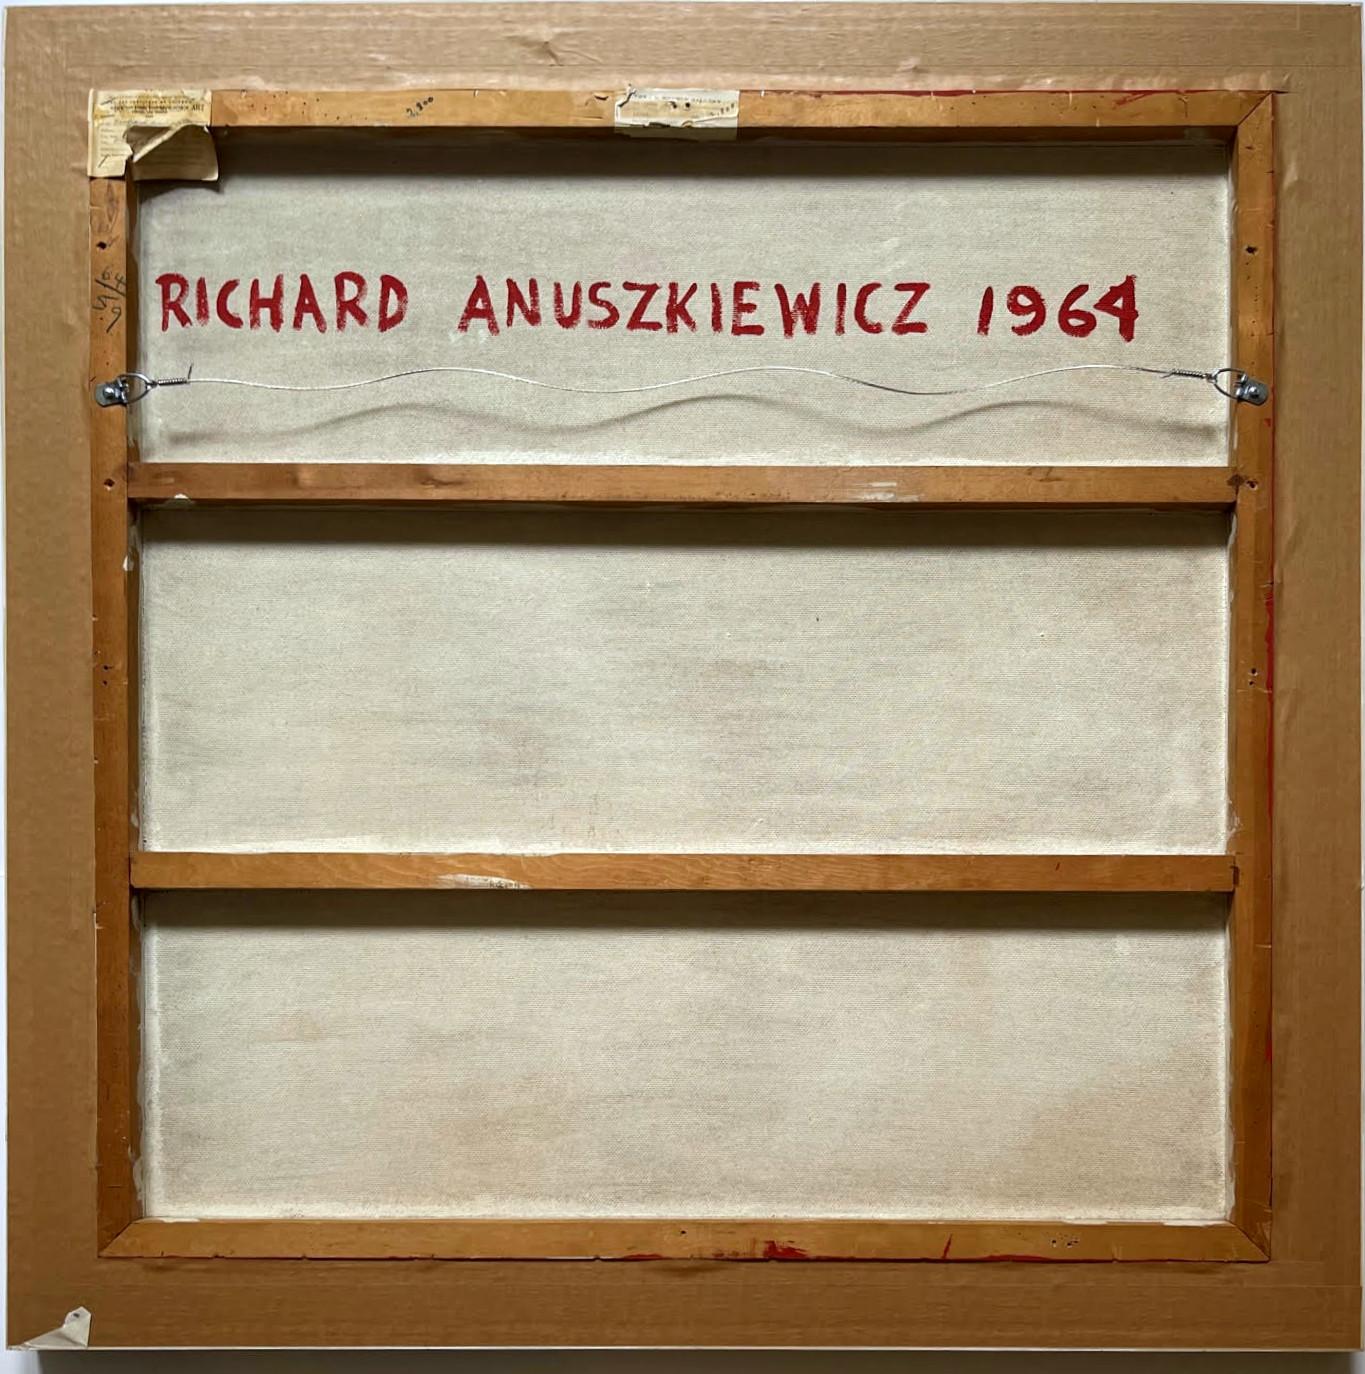 Richard Anuszkiewicz
Metallic Water, 1964
Painting with Liquitex on canvas. (1964 Art Institute of Chicago Exhibition and J.L. Hudson Gallery)
Signed boldly and dated 1964 on the verso with exhibition label from the Art Institute of Chicago and the